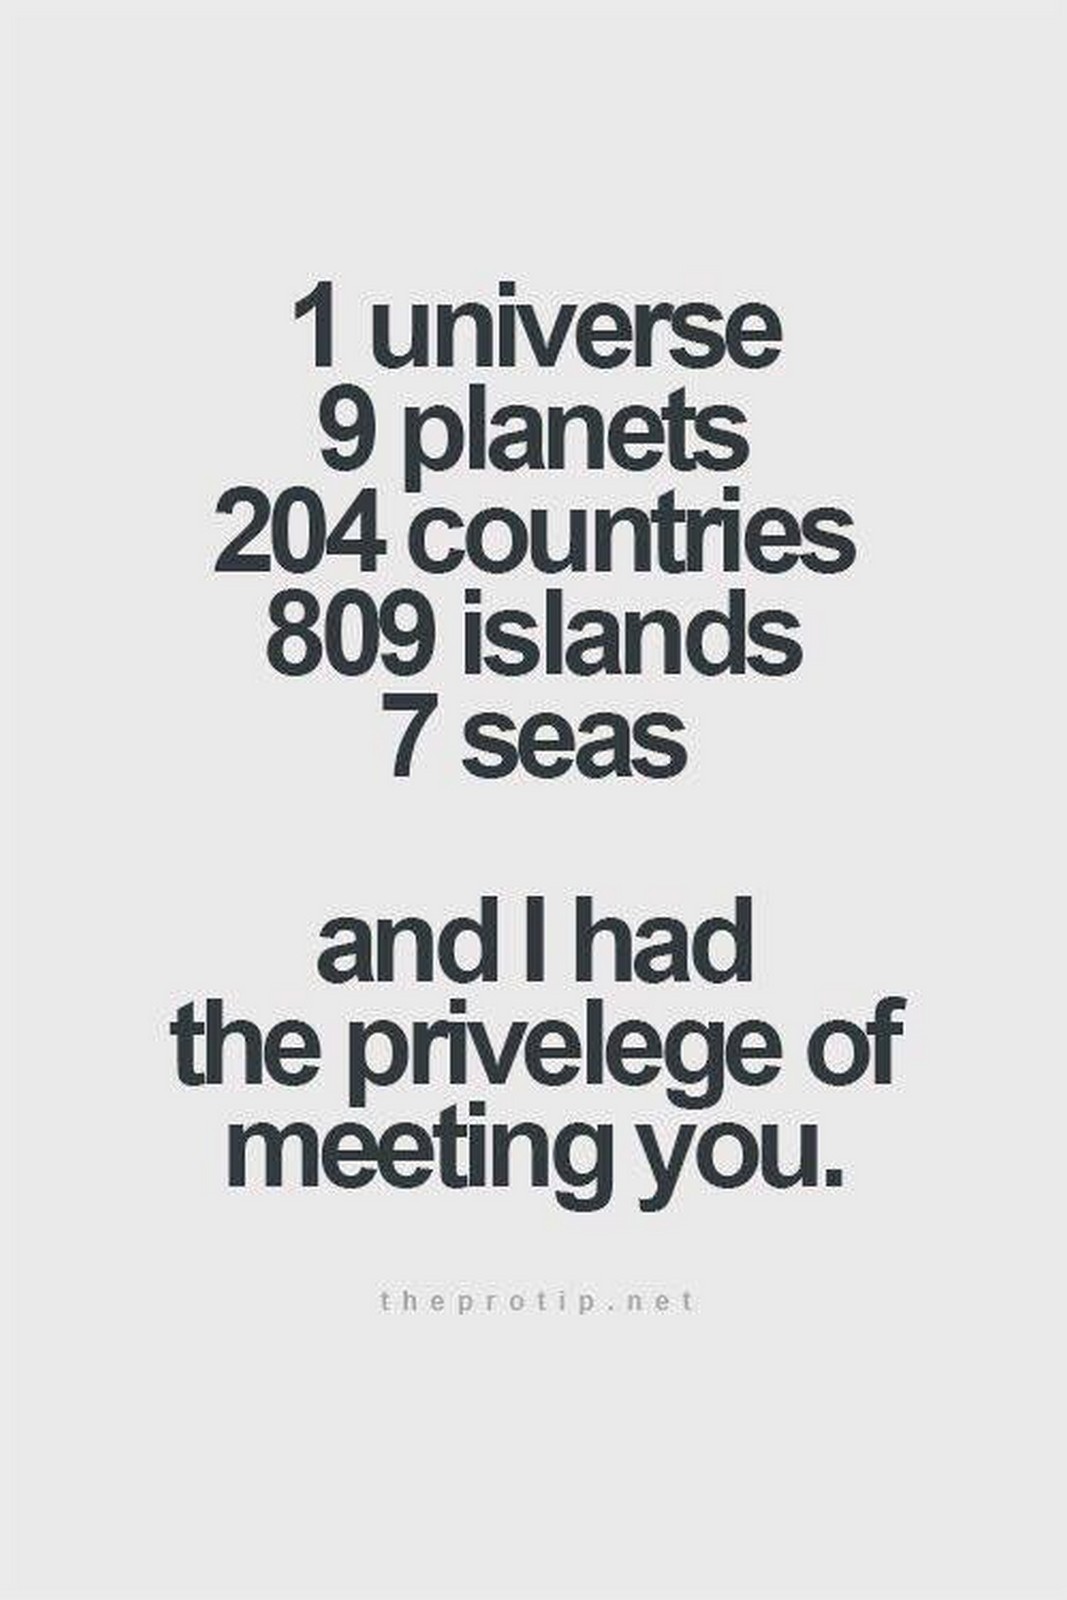 55 Romantic Quotes - "1 universe, 9 planets, 204 countries, 809 islands, 7 seas, and I had the privelege of meeting you."